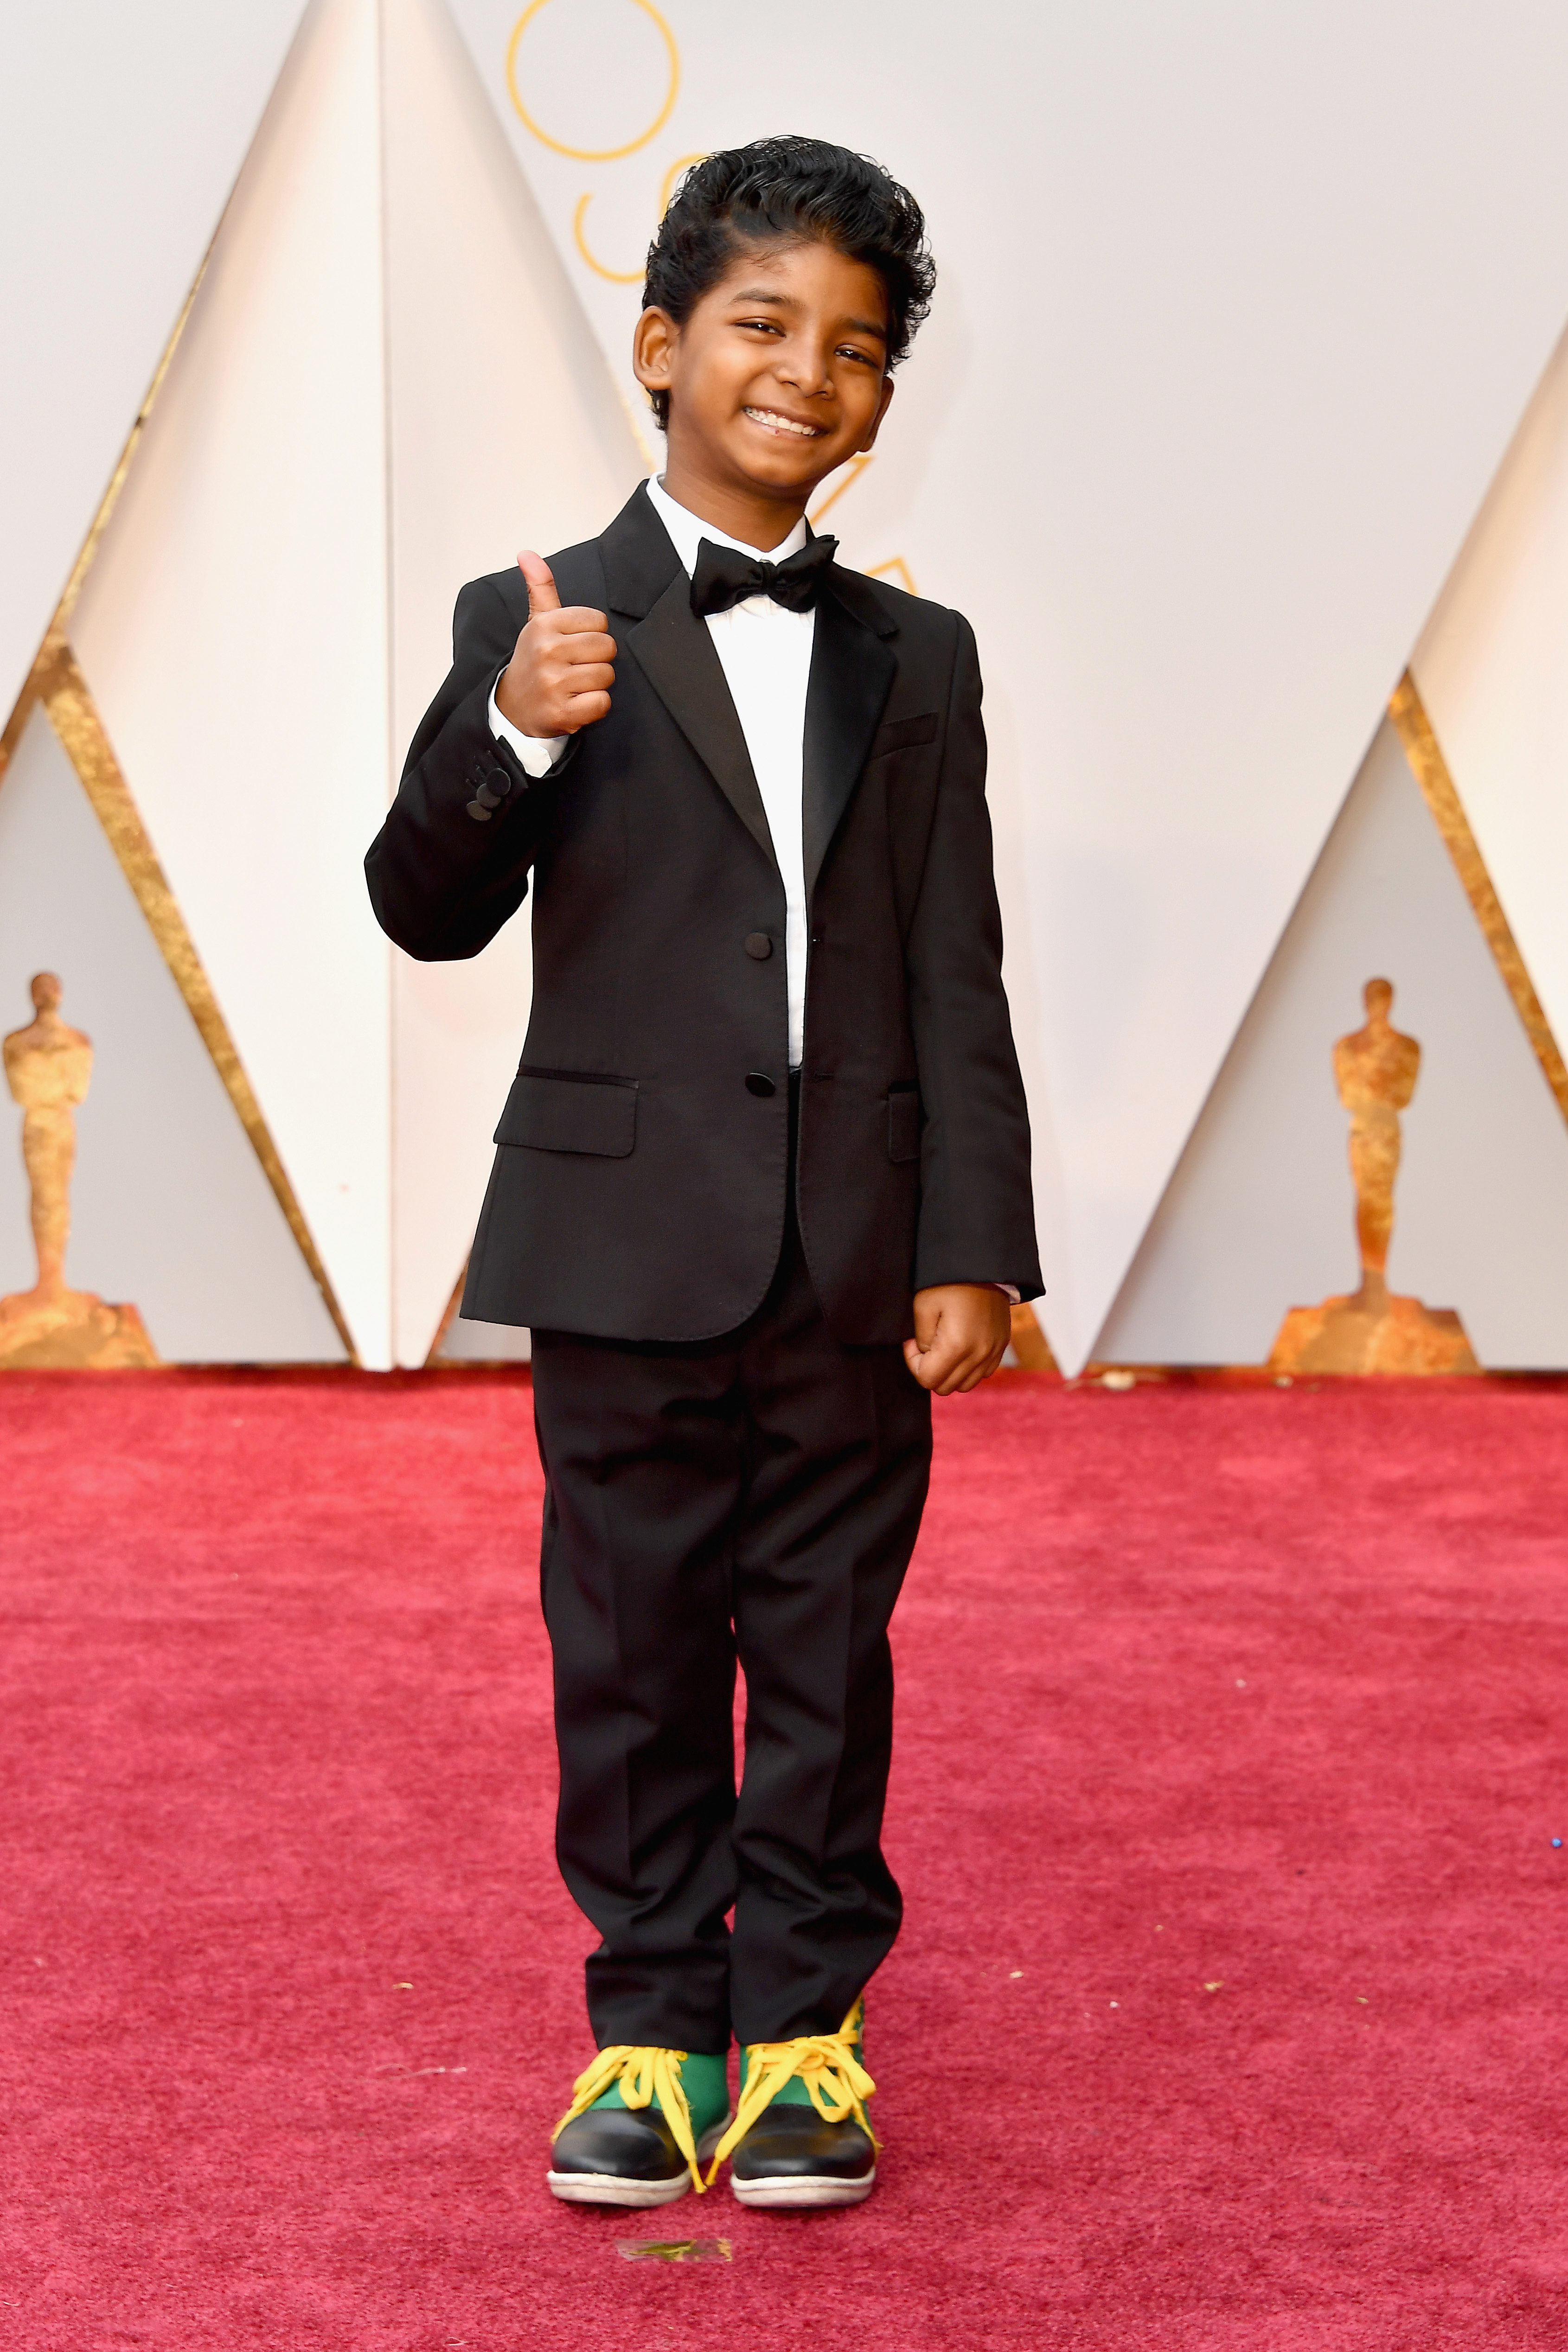 Sunny Pawar on the red carpet for the 89th Oscars, on Feb. 26, 2017 in Hollywood, Calif.